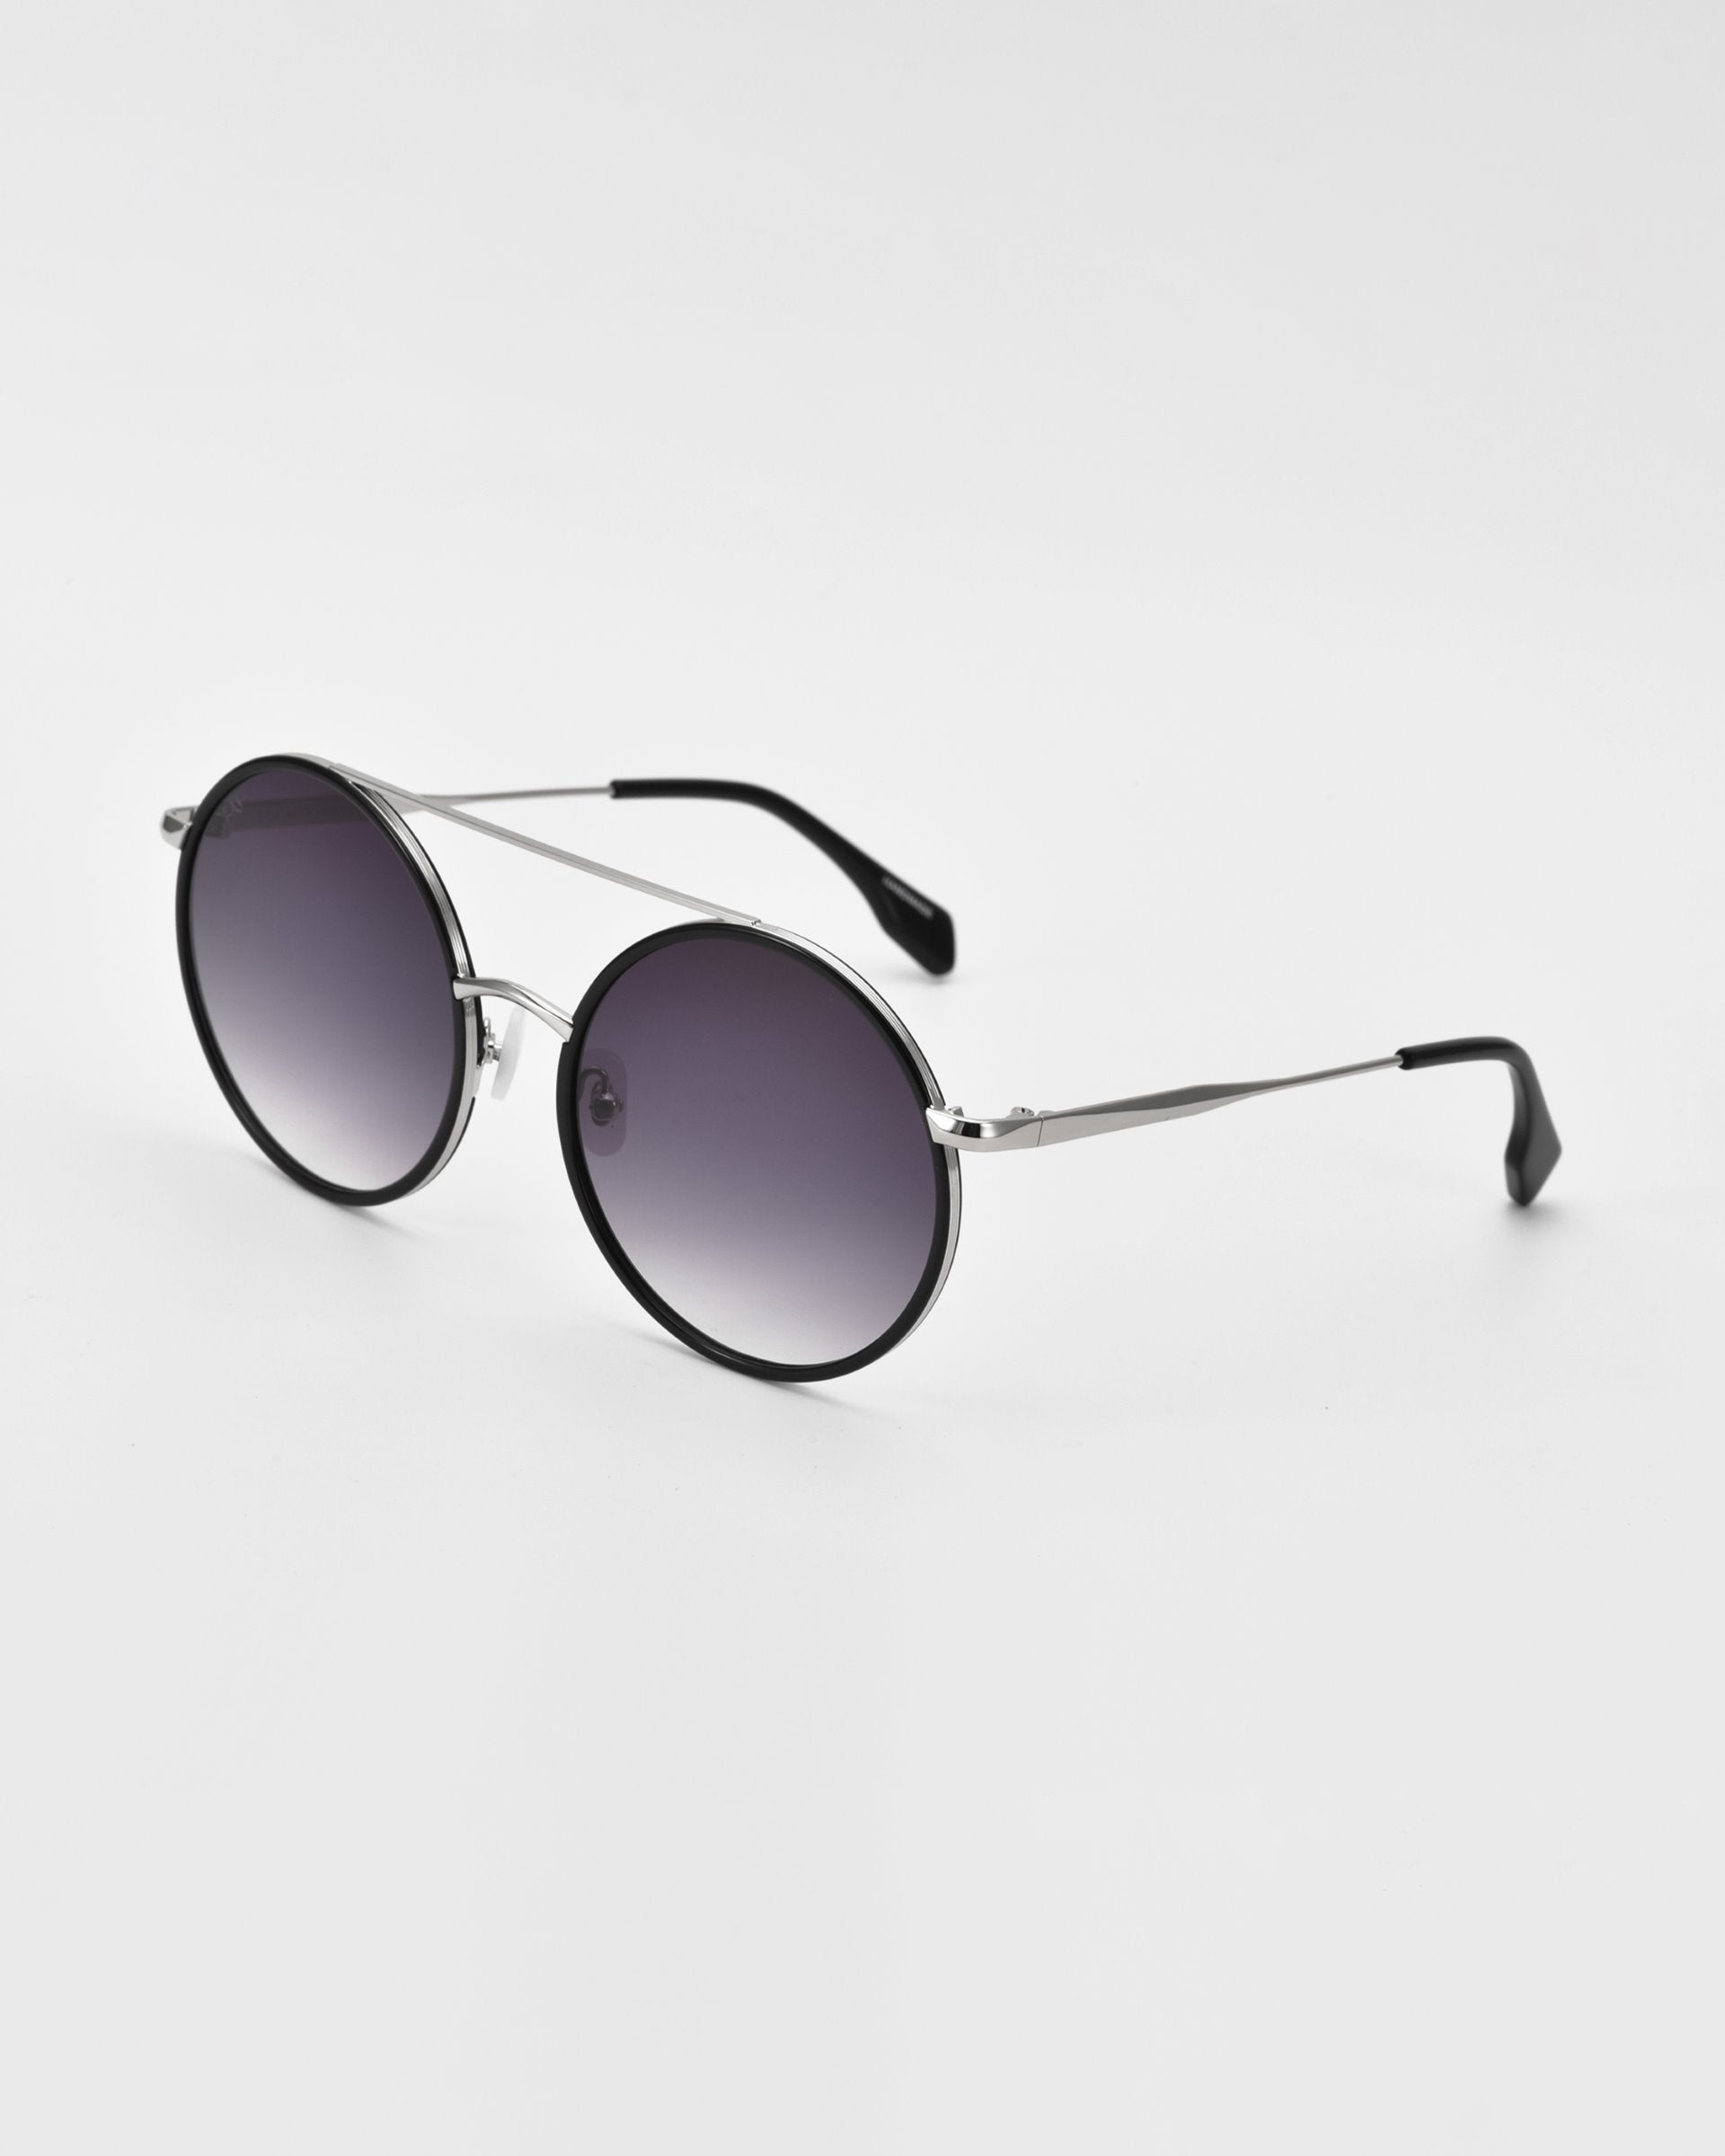 A pair of oversized round aviator sunglasses with black-rimmed, dark gradient lenses and thin, silver arms that have black ear tips. Crafted from gold and silver-tone metal, these stylish shades also feature unique jade-stone nose pads. The For Art&#39;s Sake® Orb sunglasses are placed on a flat, white surface, angled slightly to the right.